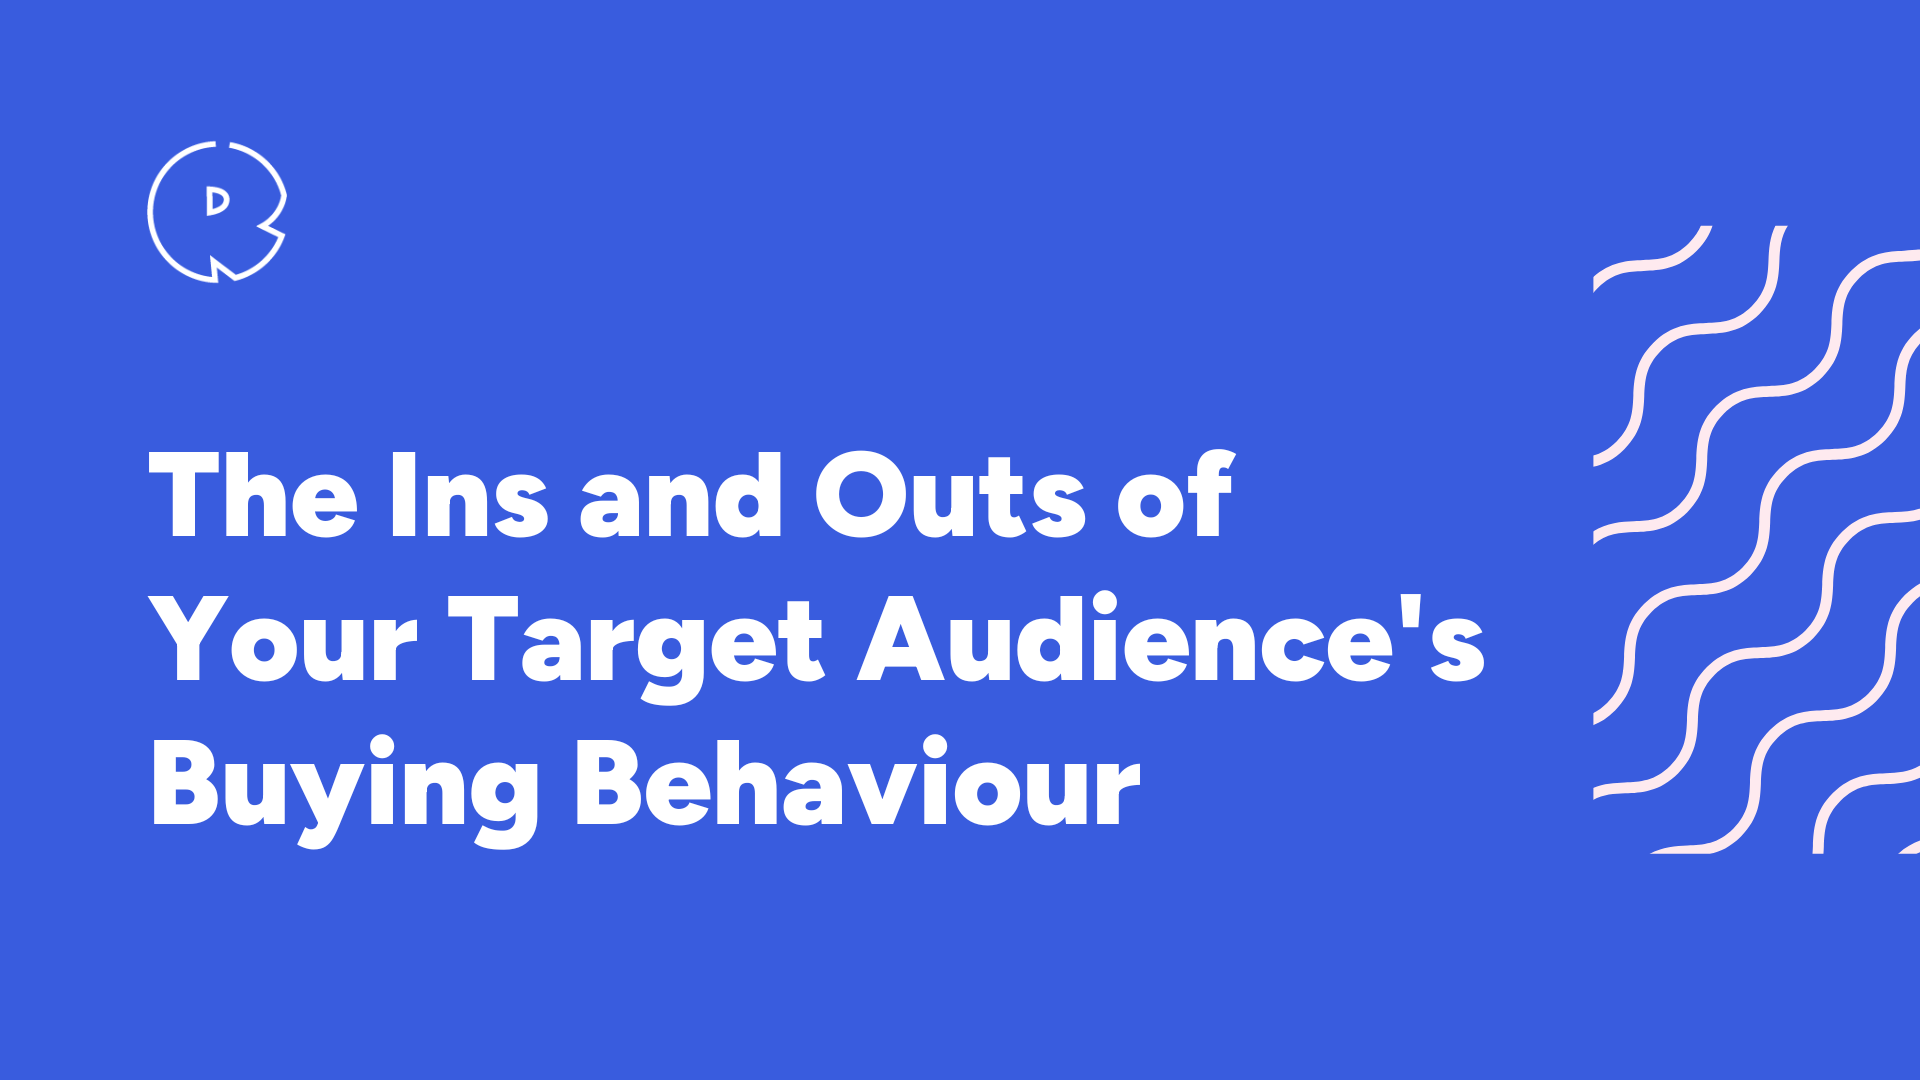 The Ins and Outs of Your Target Audience's Buying Behaviour